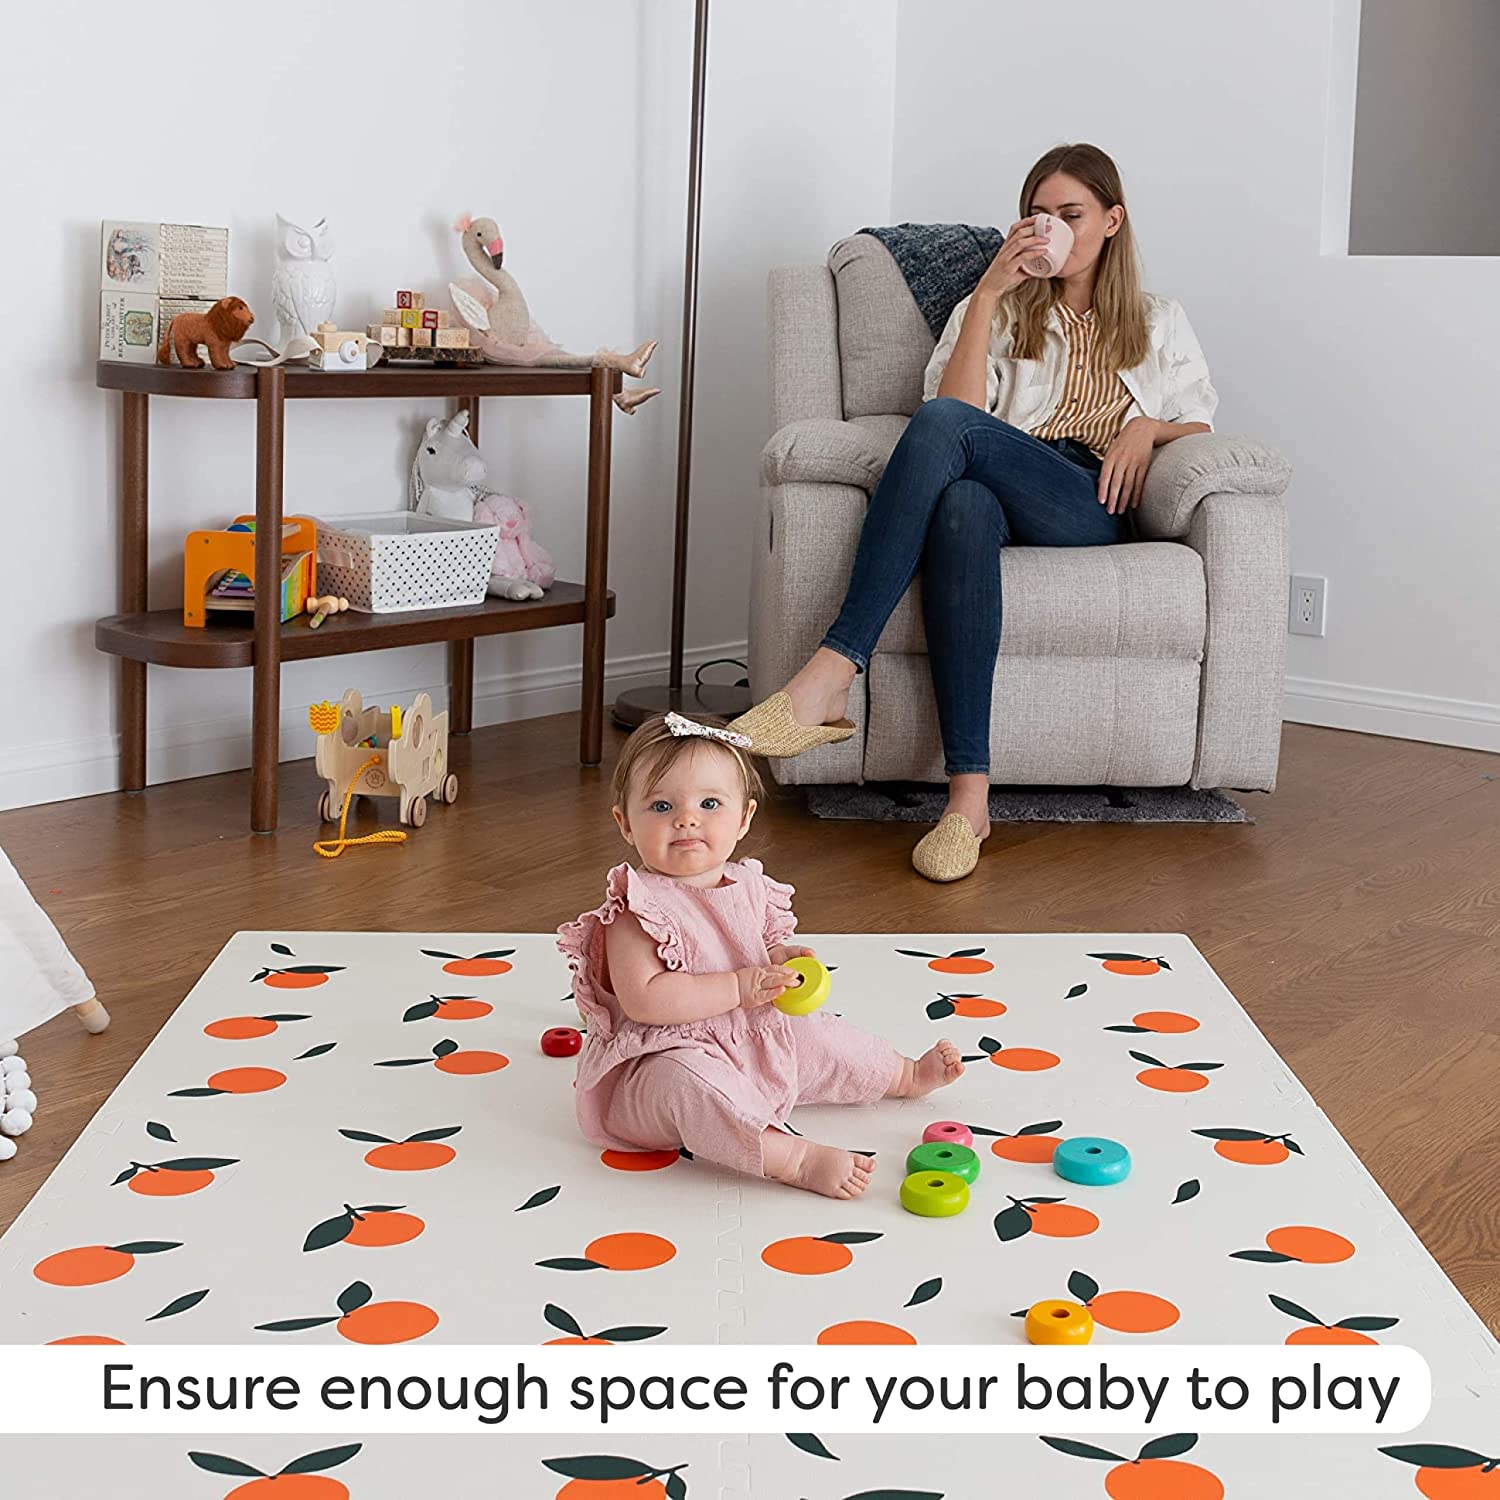 Baby Play Mat - Extra Large, Non-Toxic Foam Play Mat With Soft Interlocking Floor Tiles